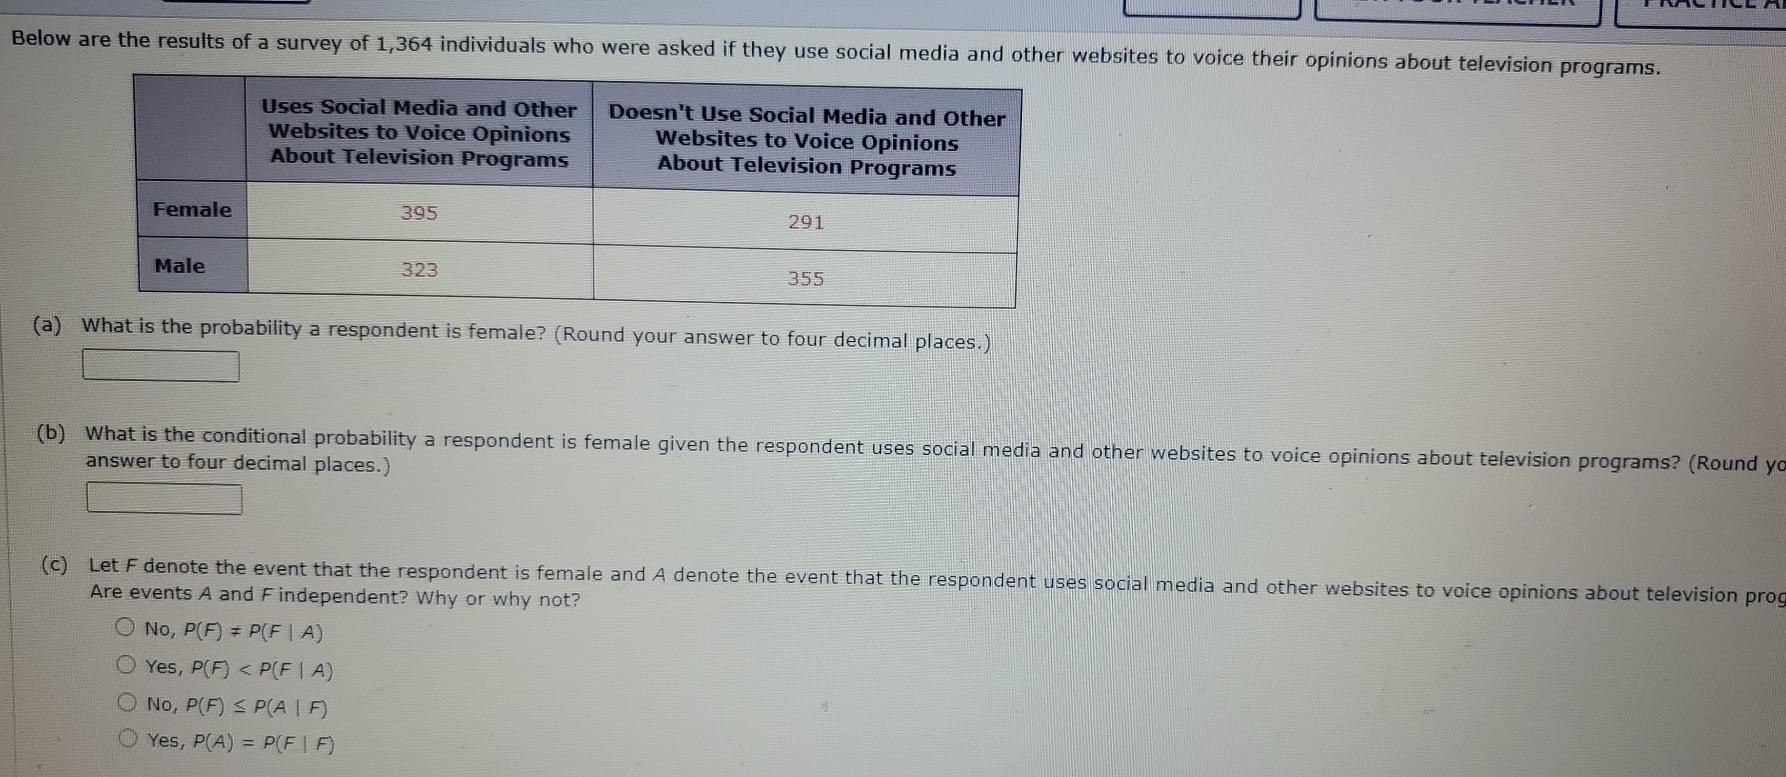 Below Are The Results Of A Survey Of 1 364 Individuals Who Were Asked If They Use Social Media And Other Websites To Voi 1